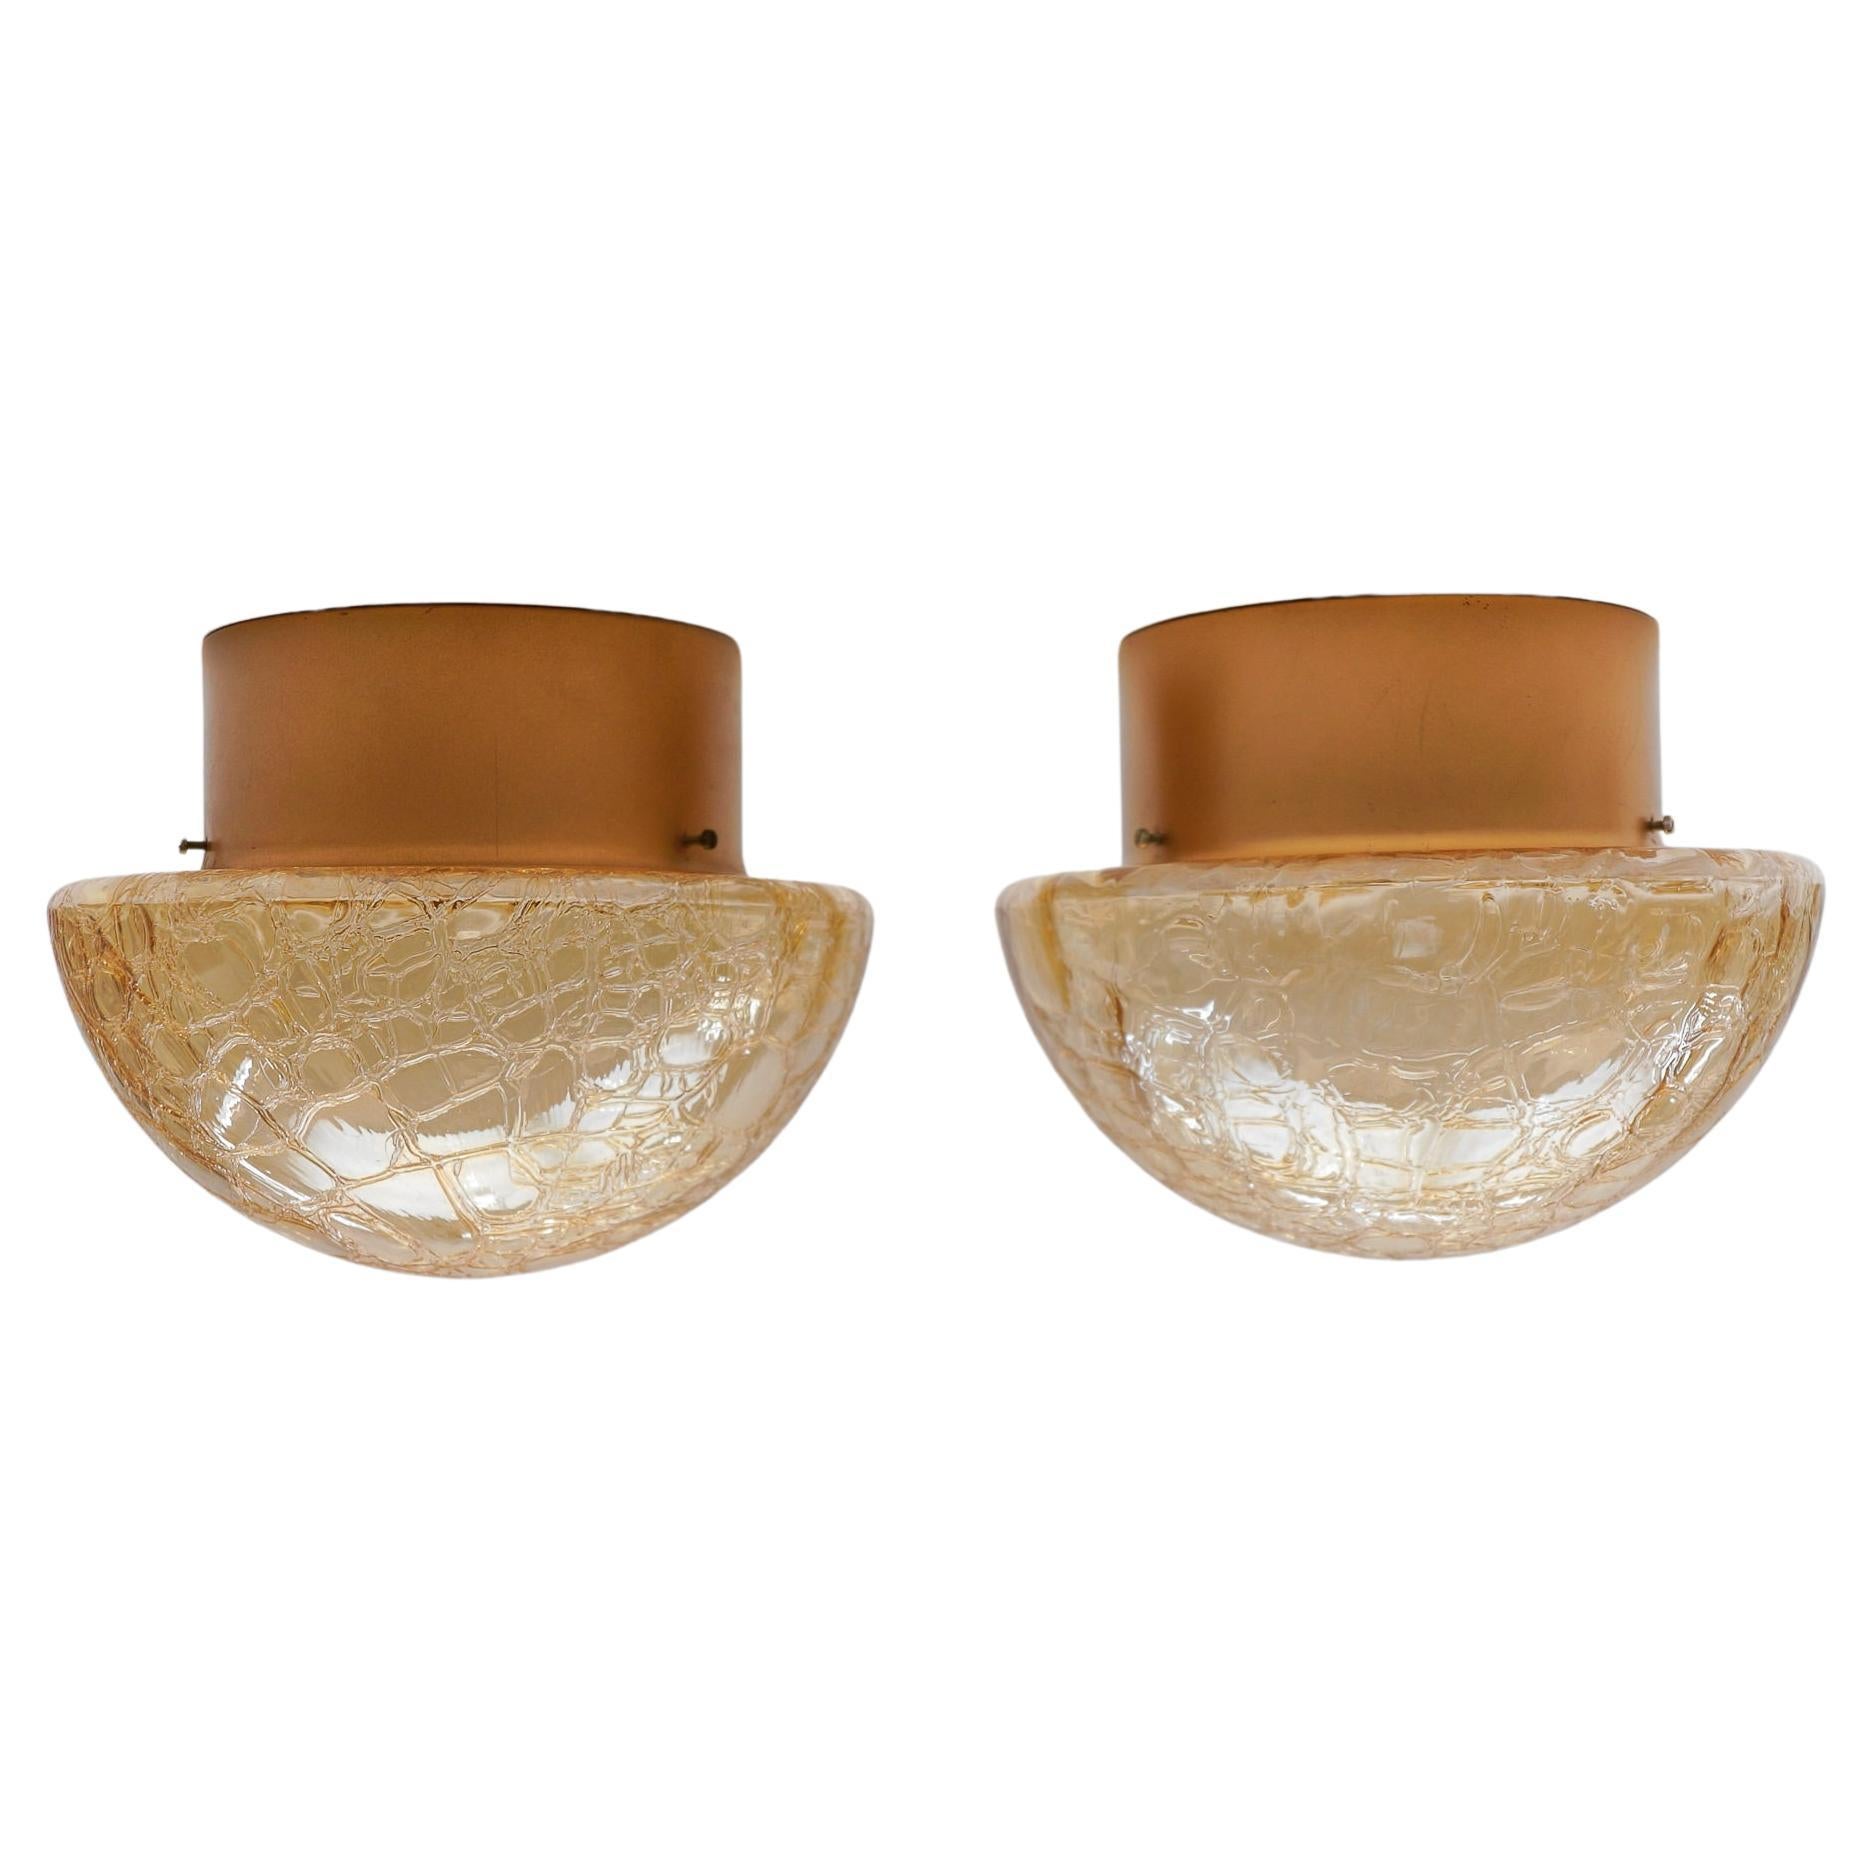 Pair of Amber Gold Mushroom Shaped Wall Lamps / Flush Mount Lights, 1960s For Sale